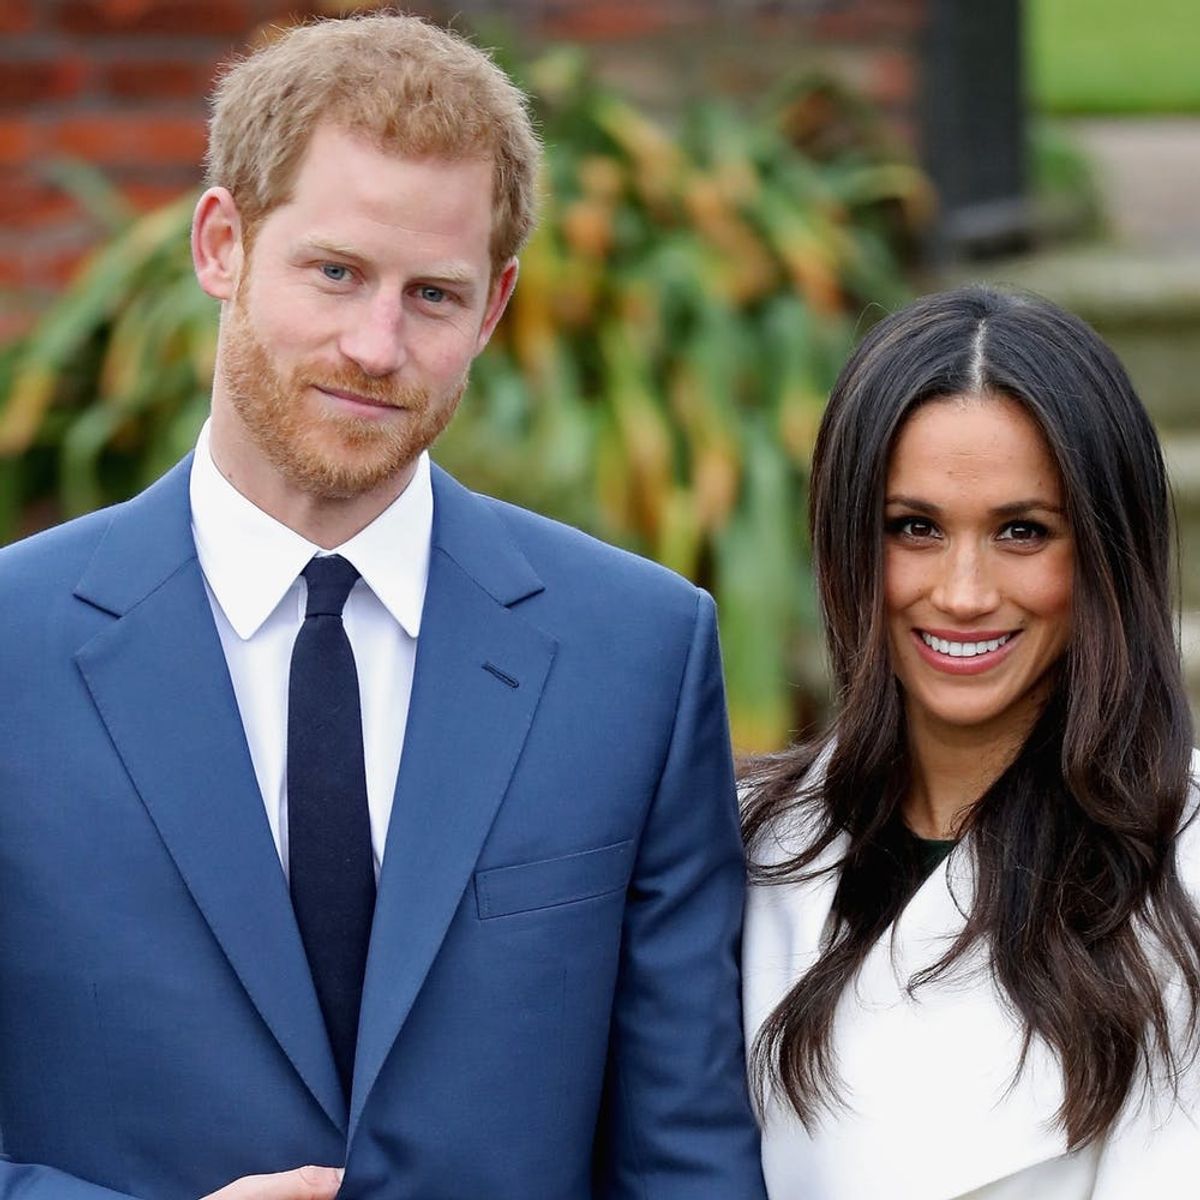 These Royal Wedding Dolls of Prince Harry and Meghan Markle Are Getting Major Backlash: Here’s Why